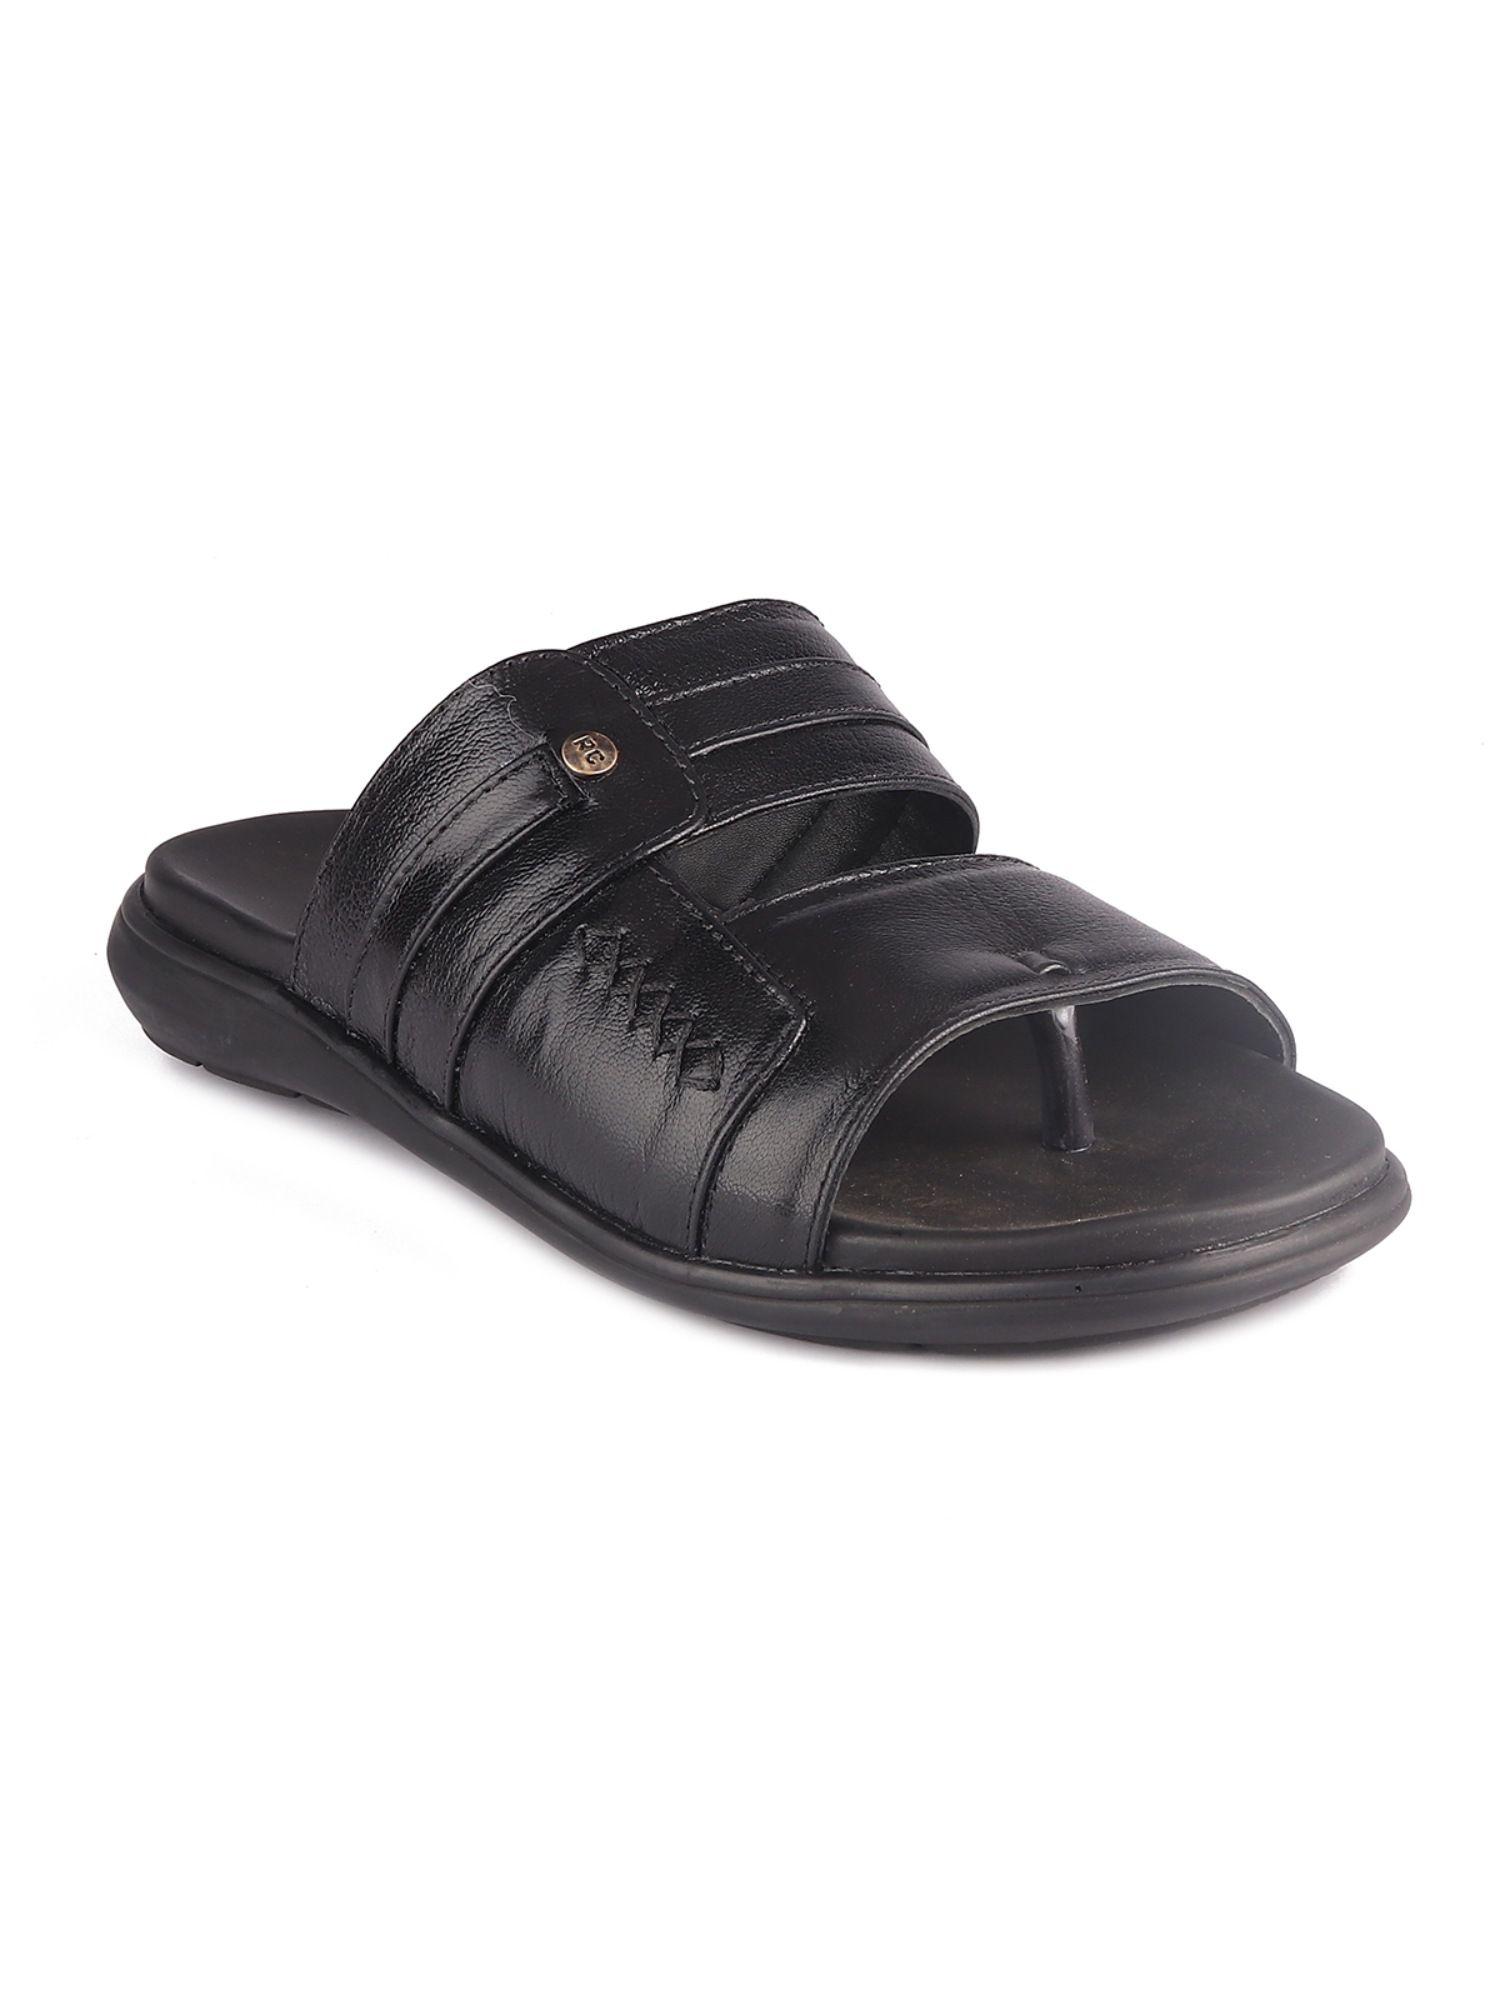 black leather casual solid classic slipper for men